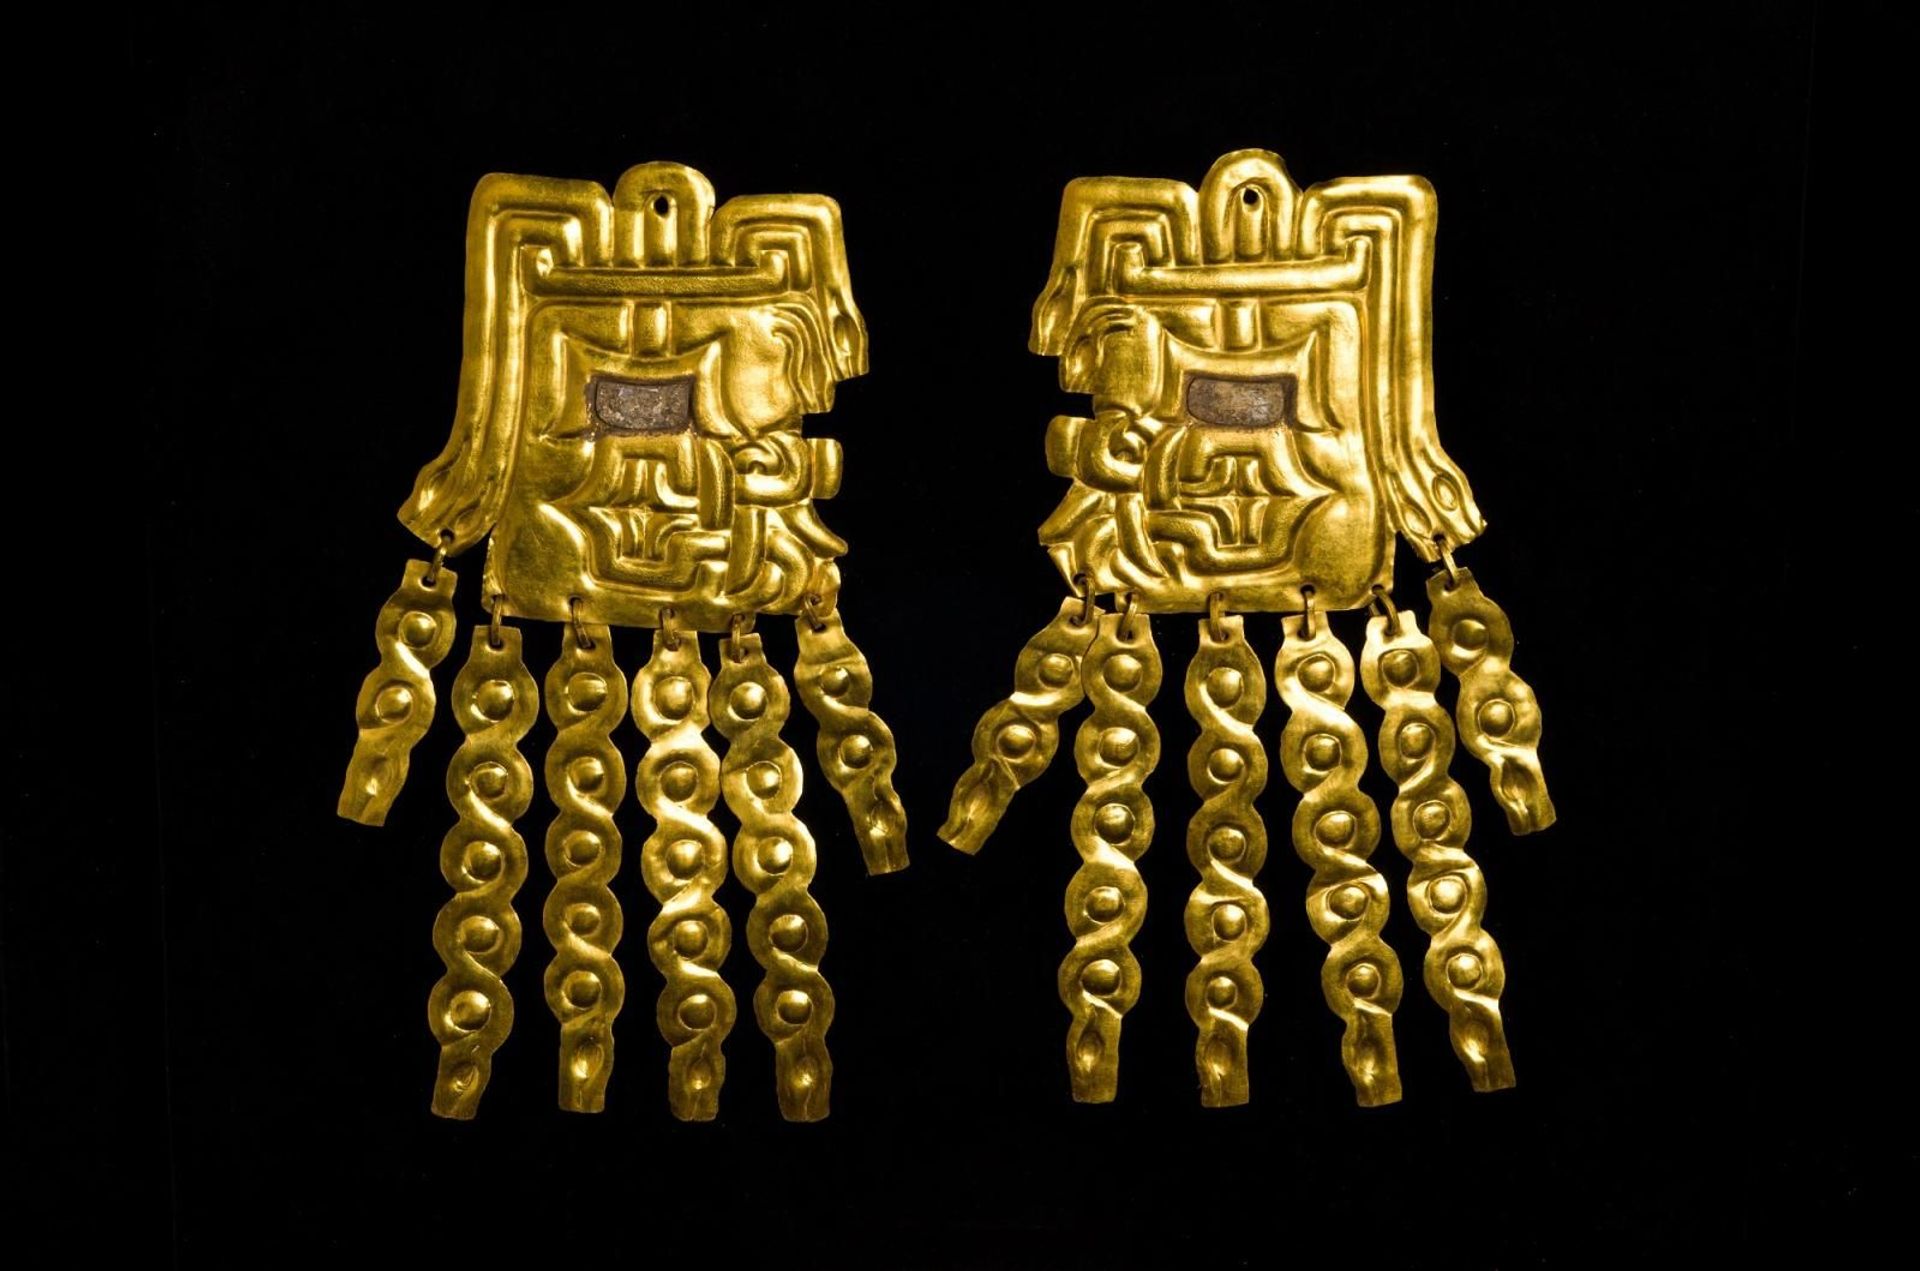 Gold alloy and shell ear plates with feline features, Peru, 800 BCE to 550 BCE (Photo: Alvaro Uematsu/The British Museum)